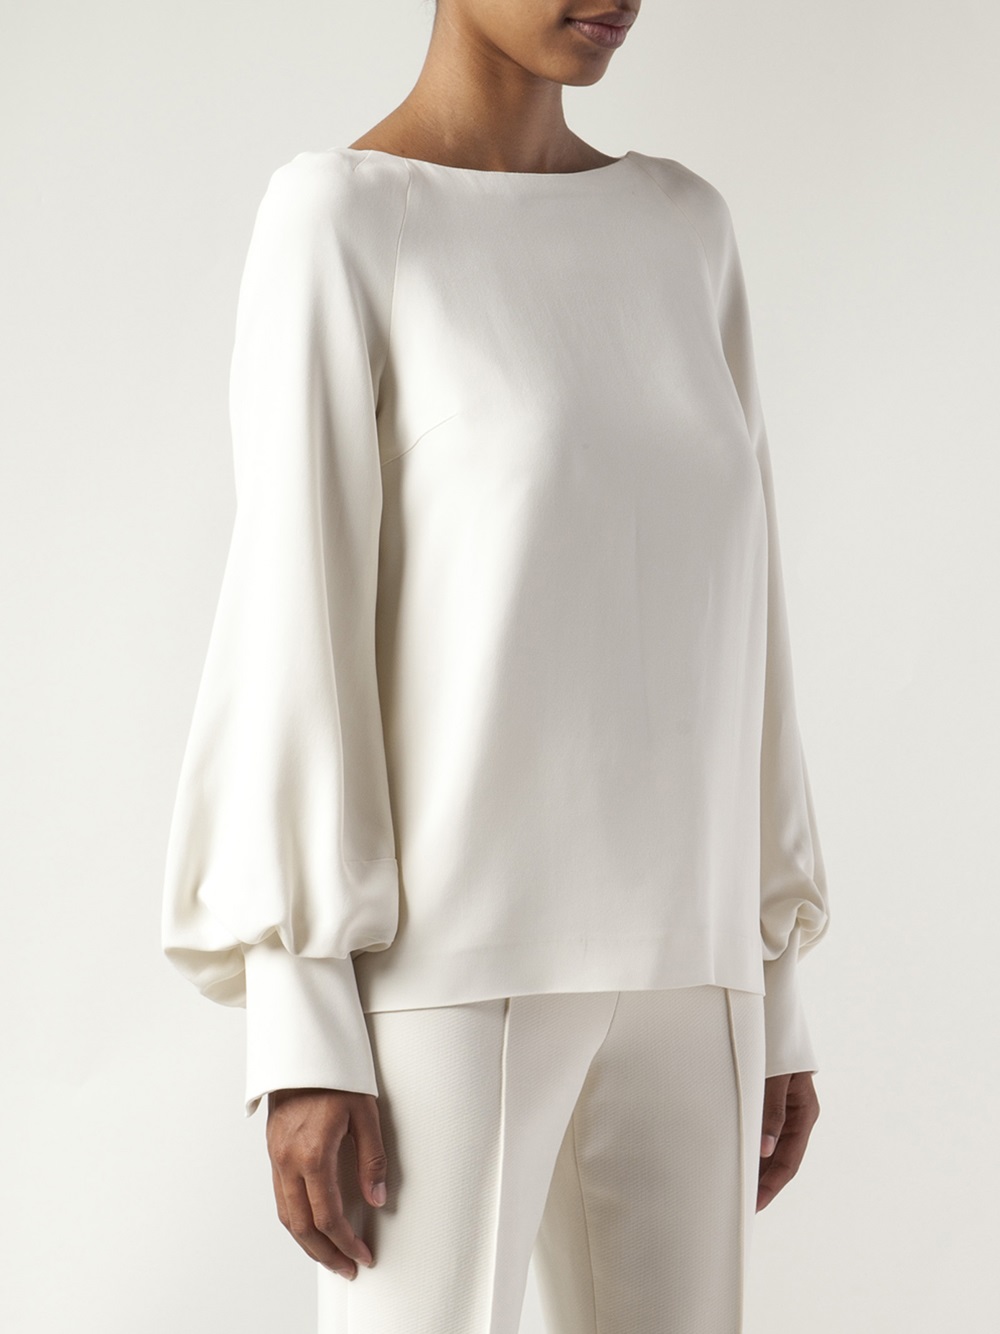 Lyst - The Row Bell Sleeve Blouse in Natural